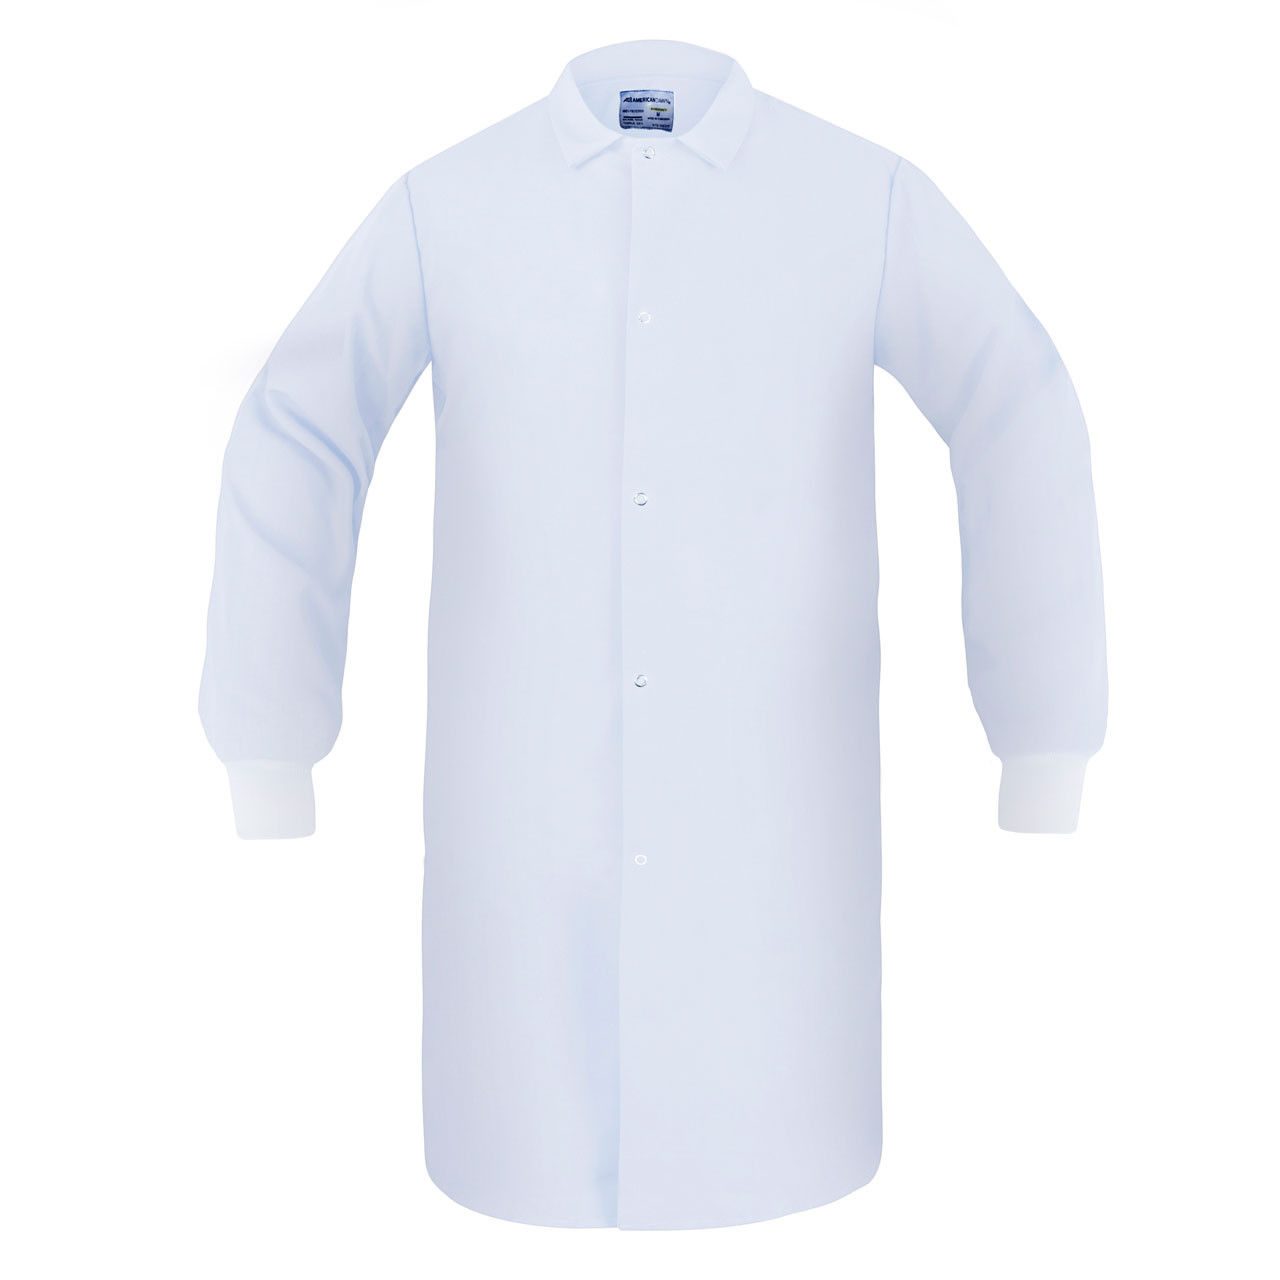 Is the white HACCP frock a suitable haccp uniform for the healthcare industry?